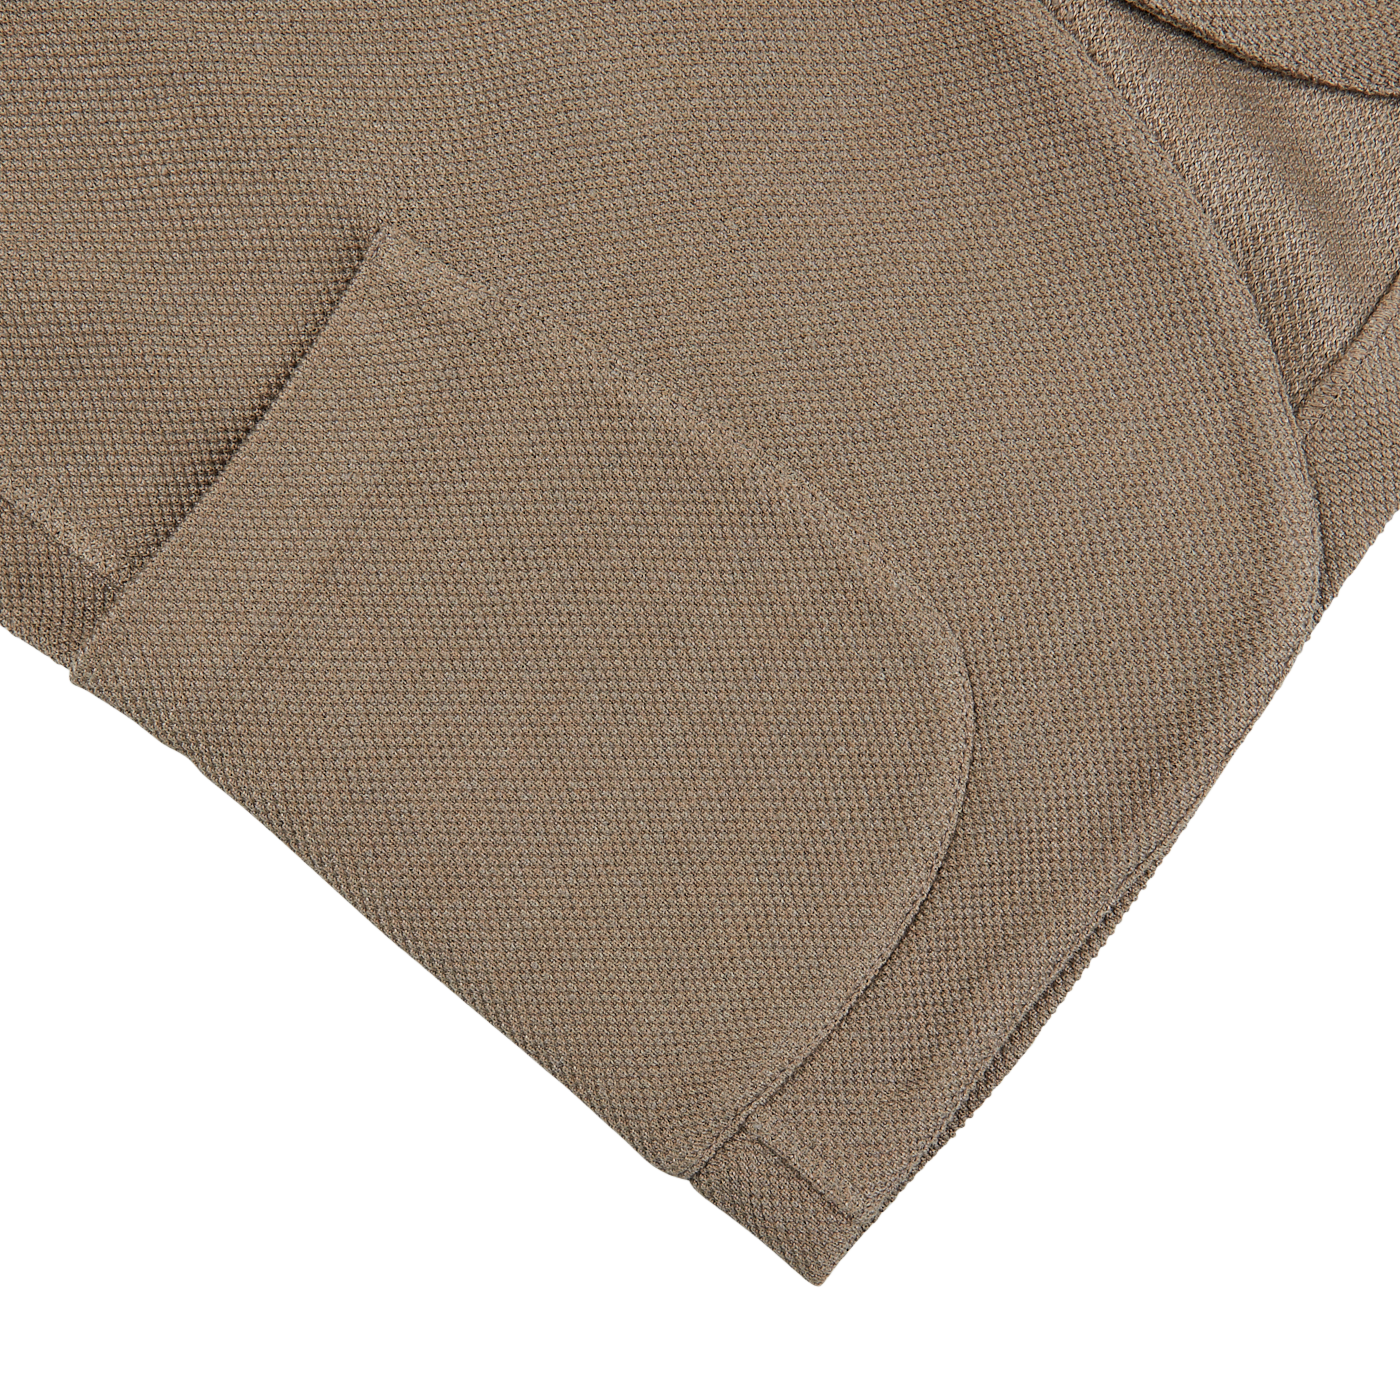 A close up of a Gran Sasso Taupe Brown Cotton Linen Knitted Blazer pocket on a white surface.